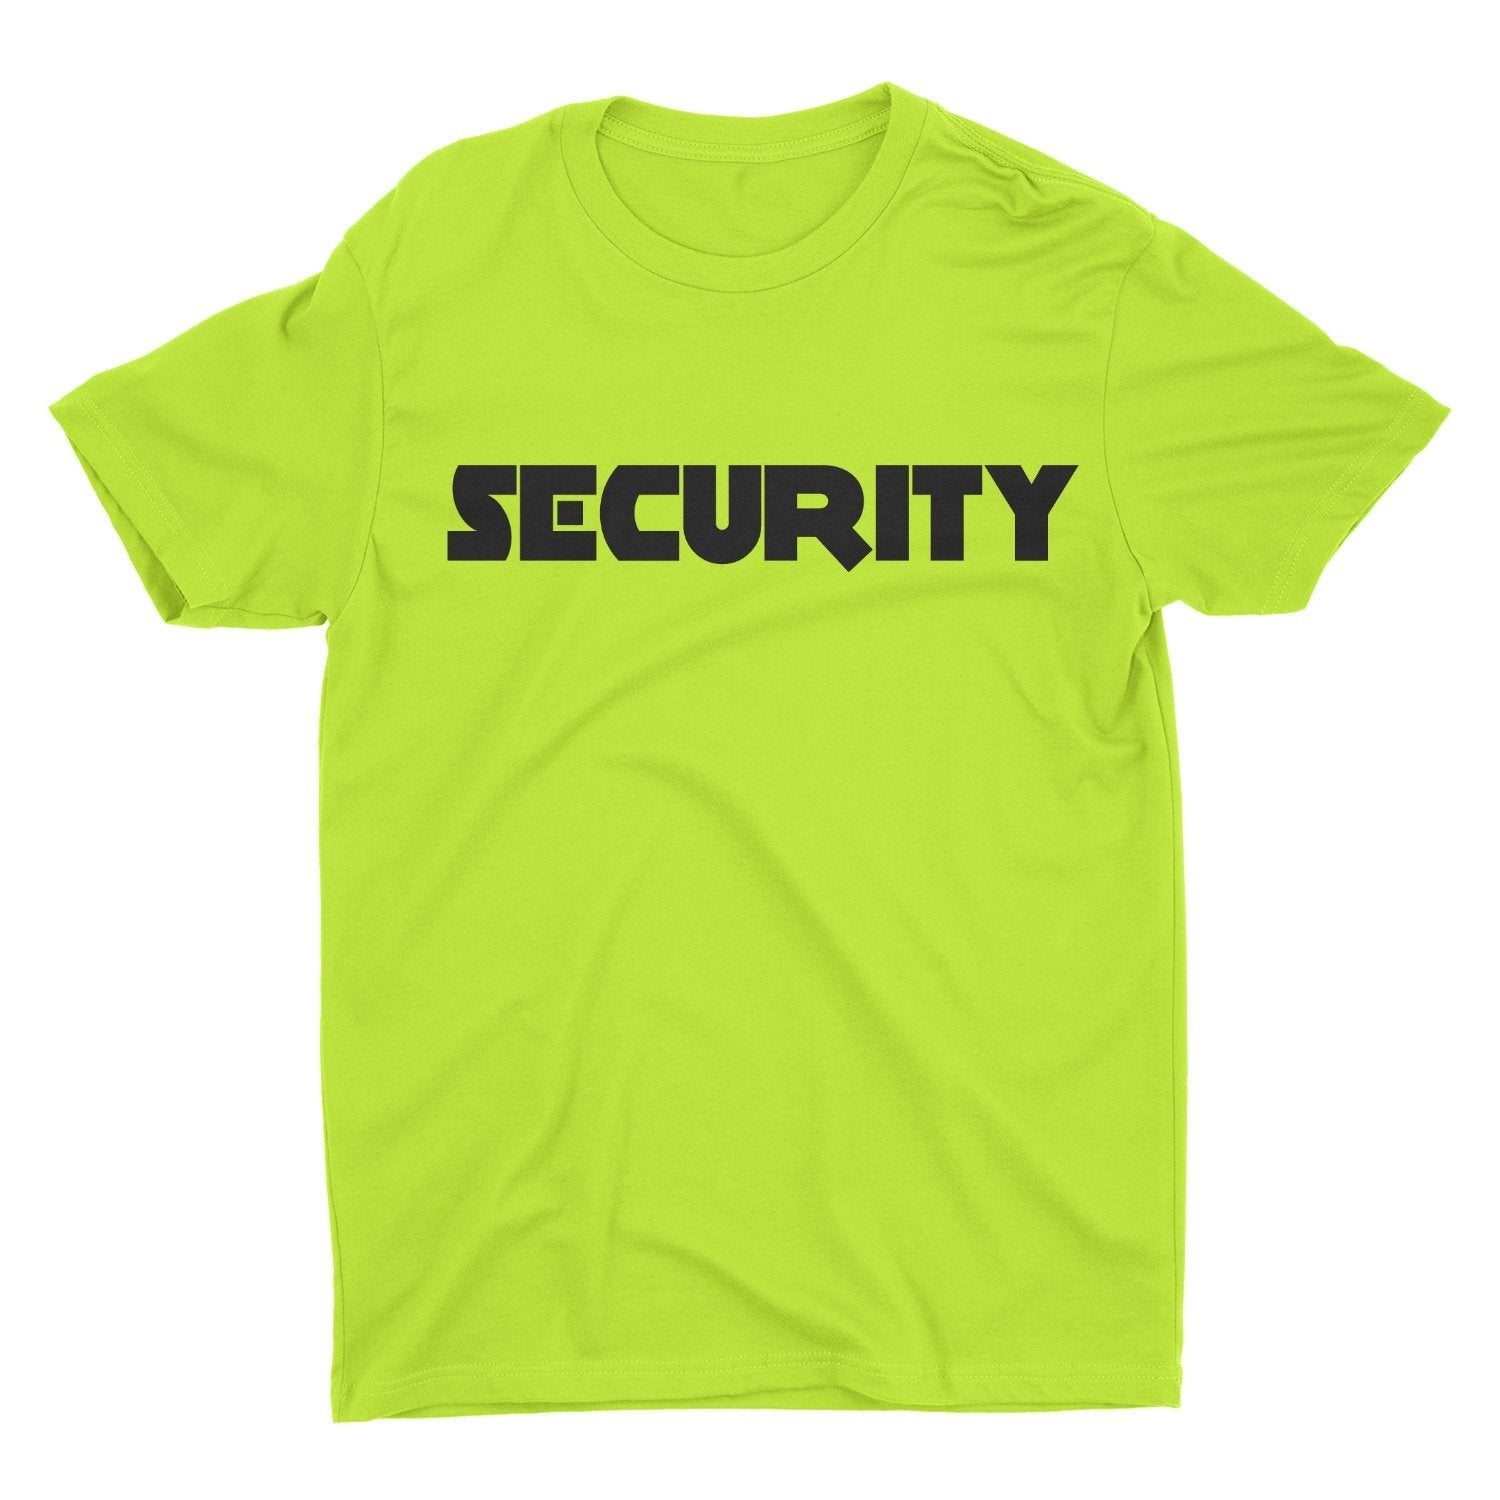 Men's Security T-Shirt Front & Back Screen Printed (Safety Green-Black)